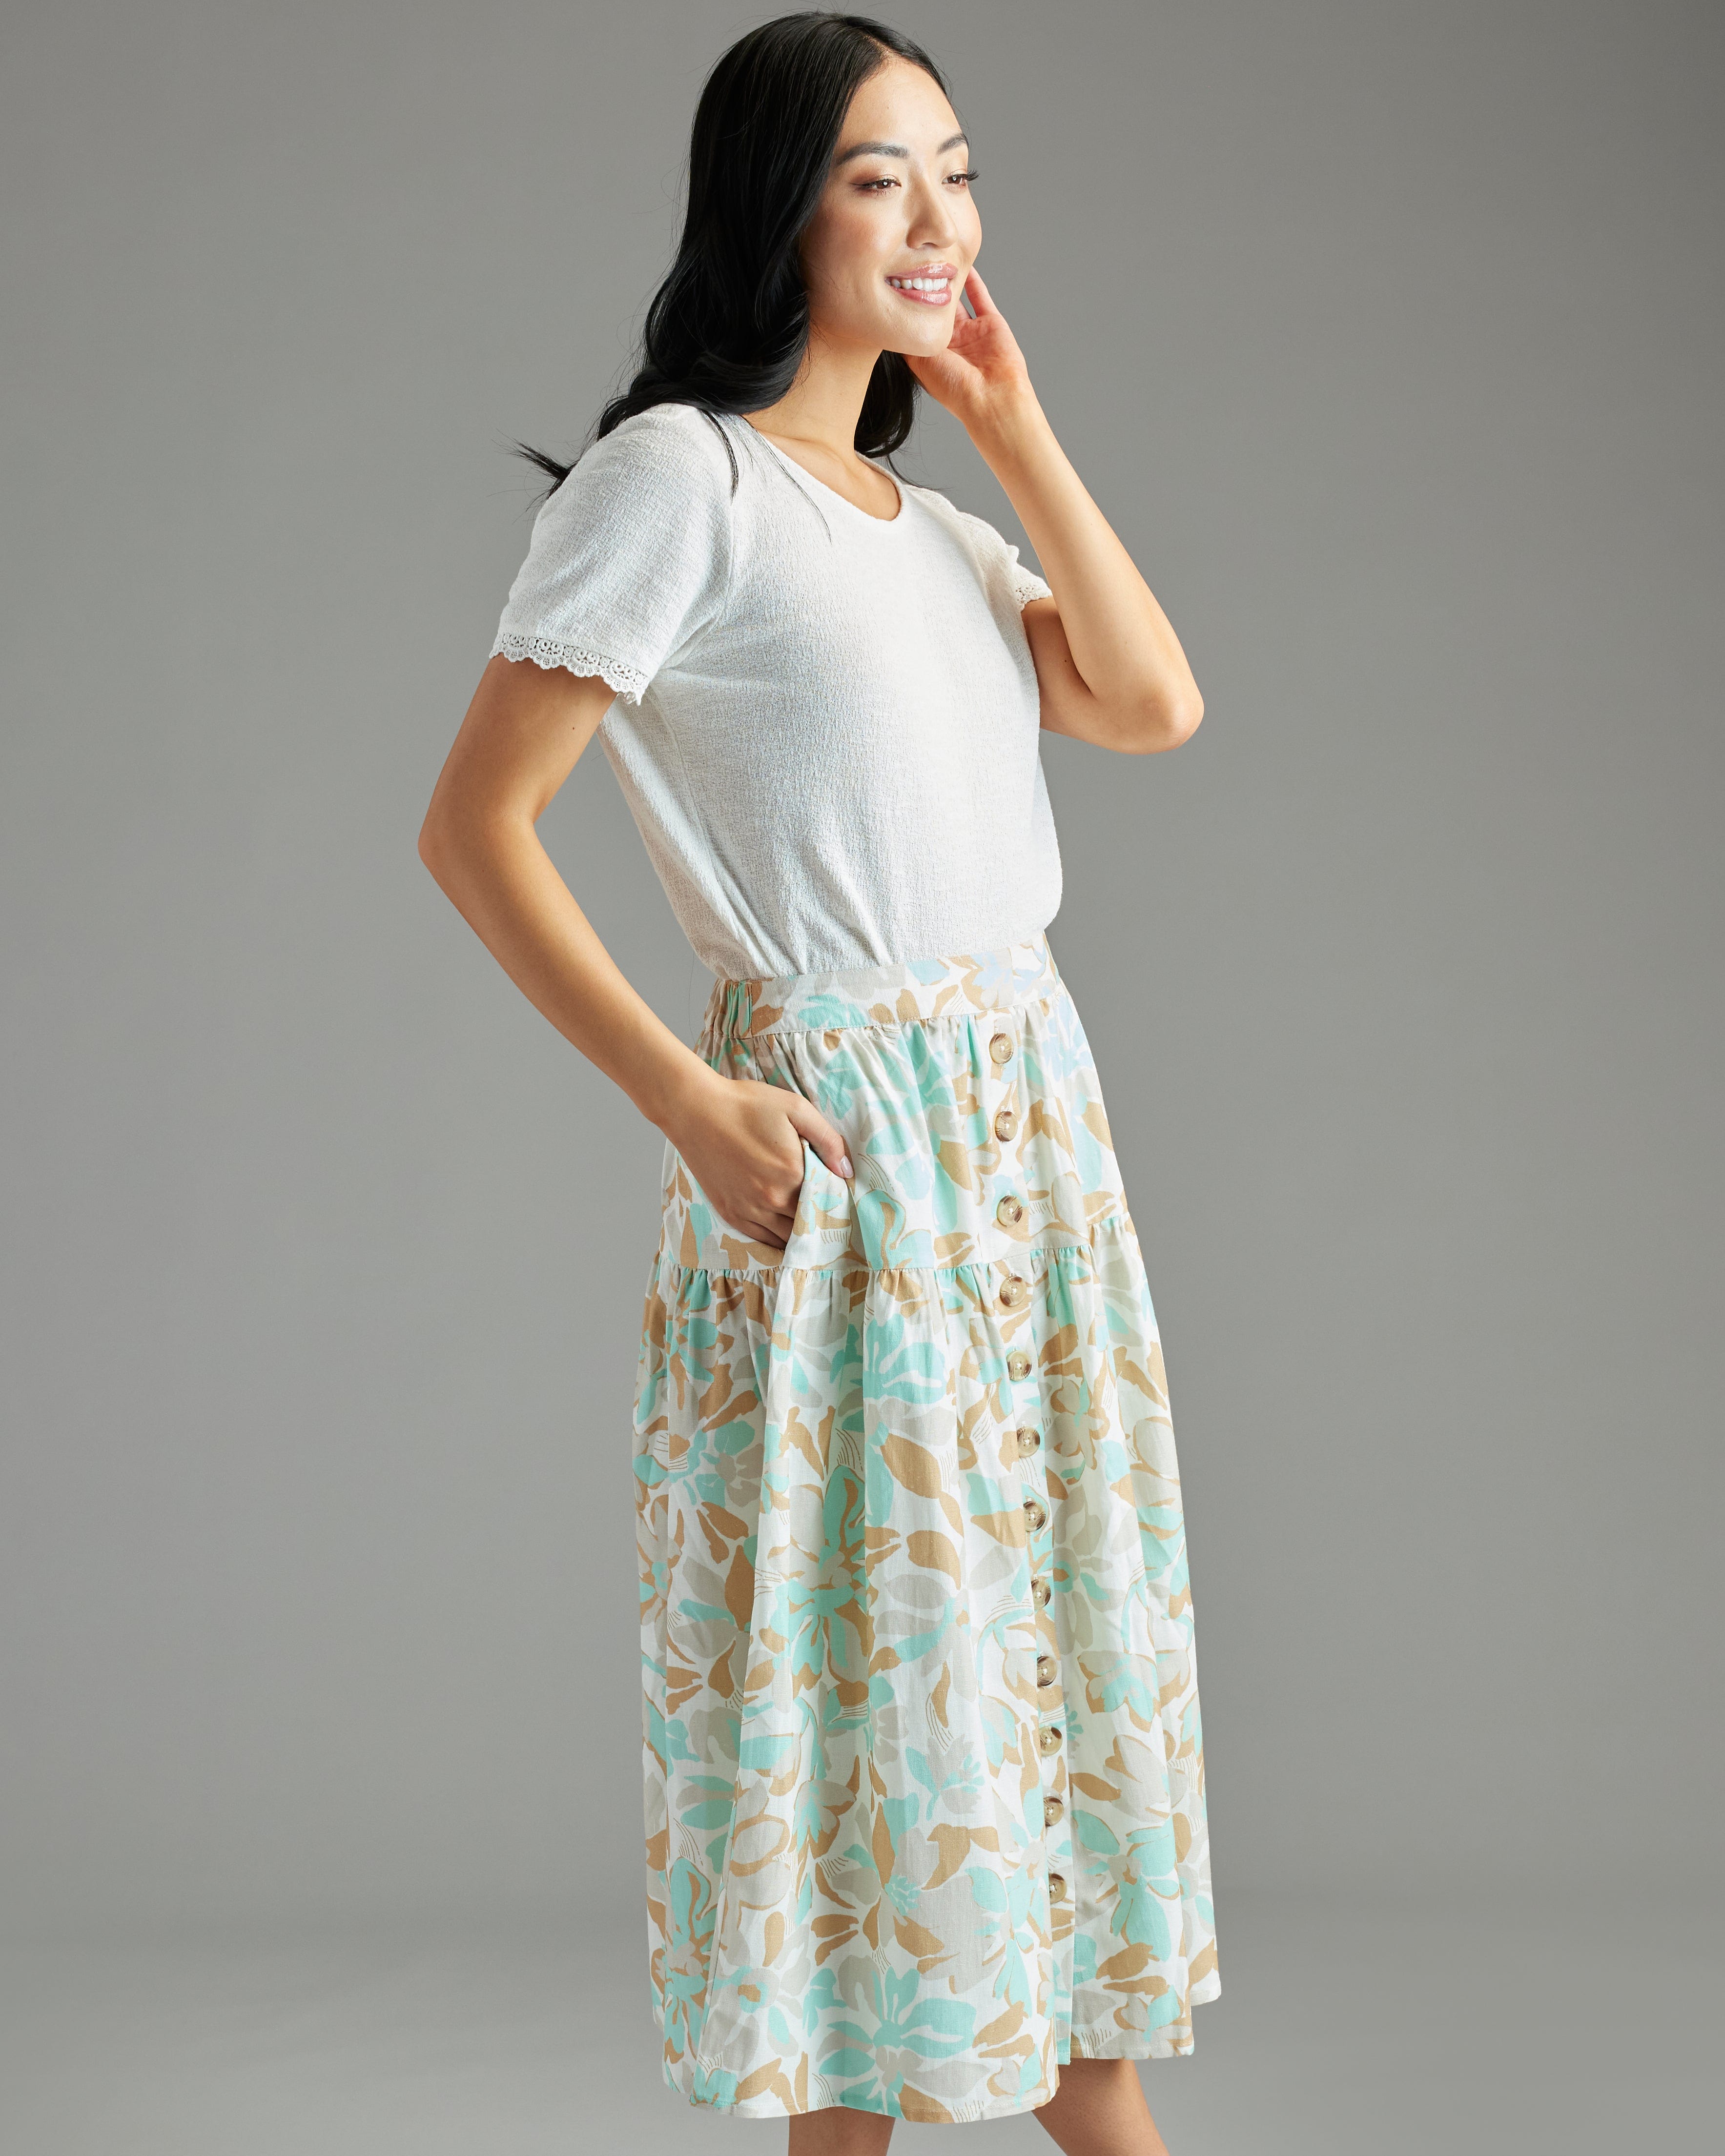 Woman in blue and brown floral print button down skirt